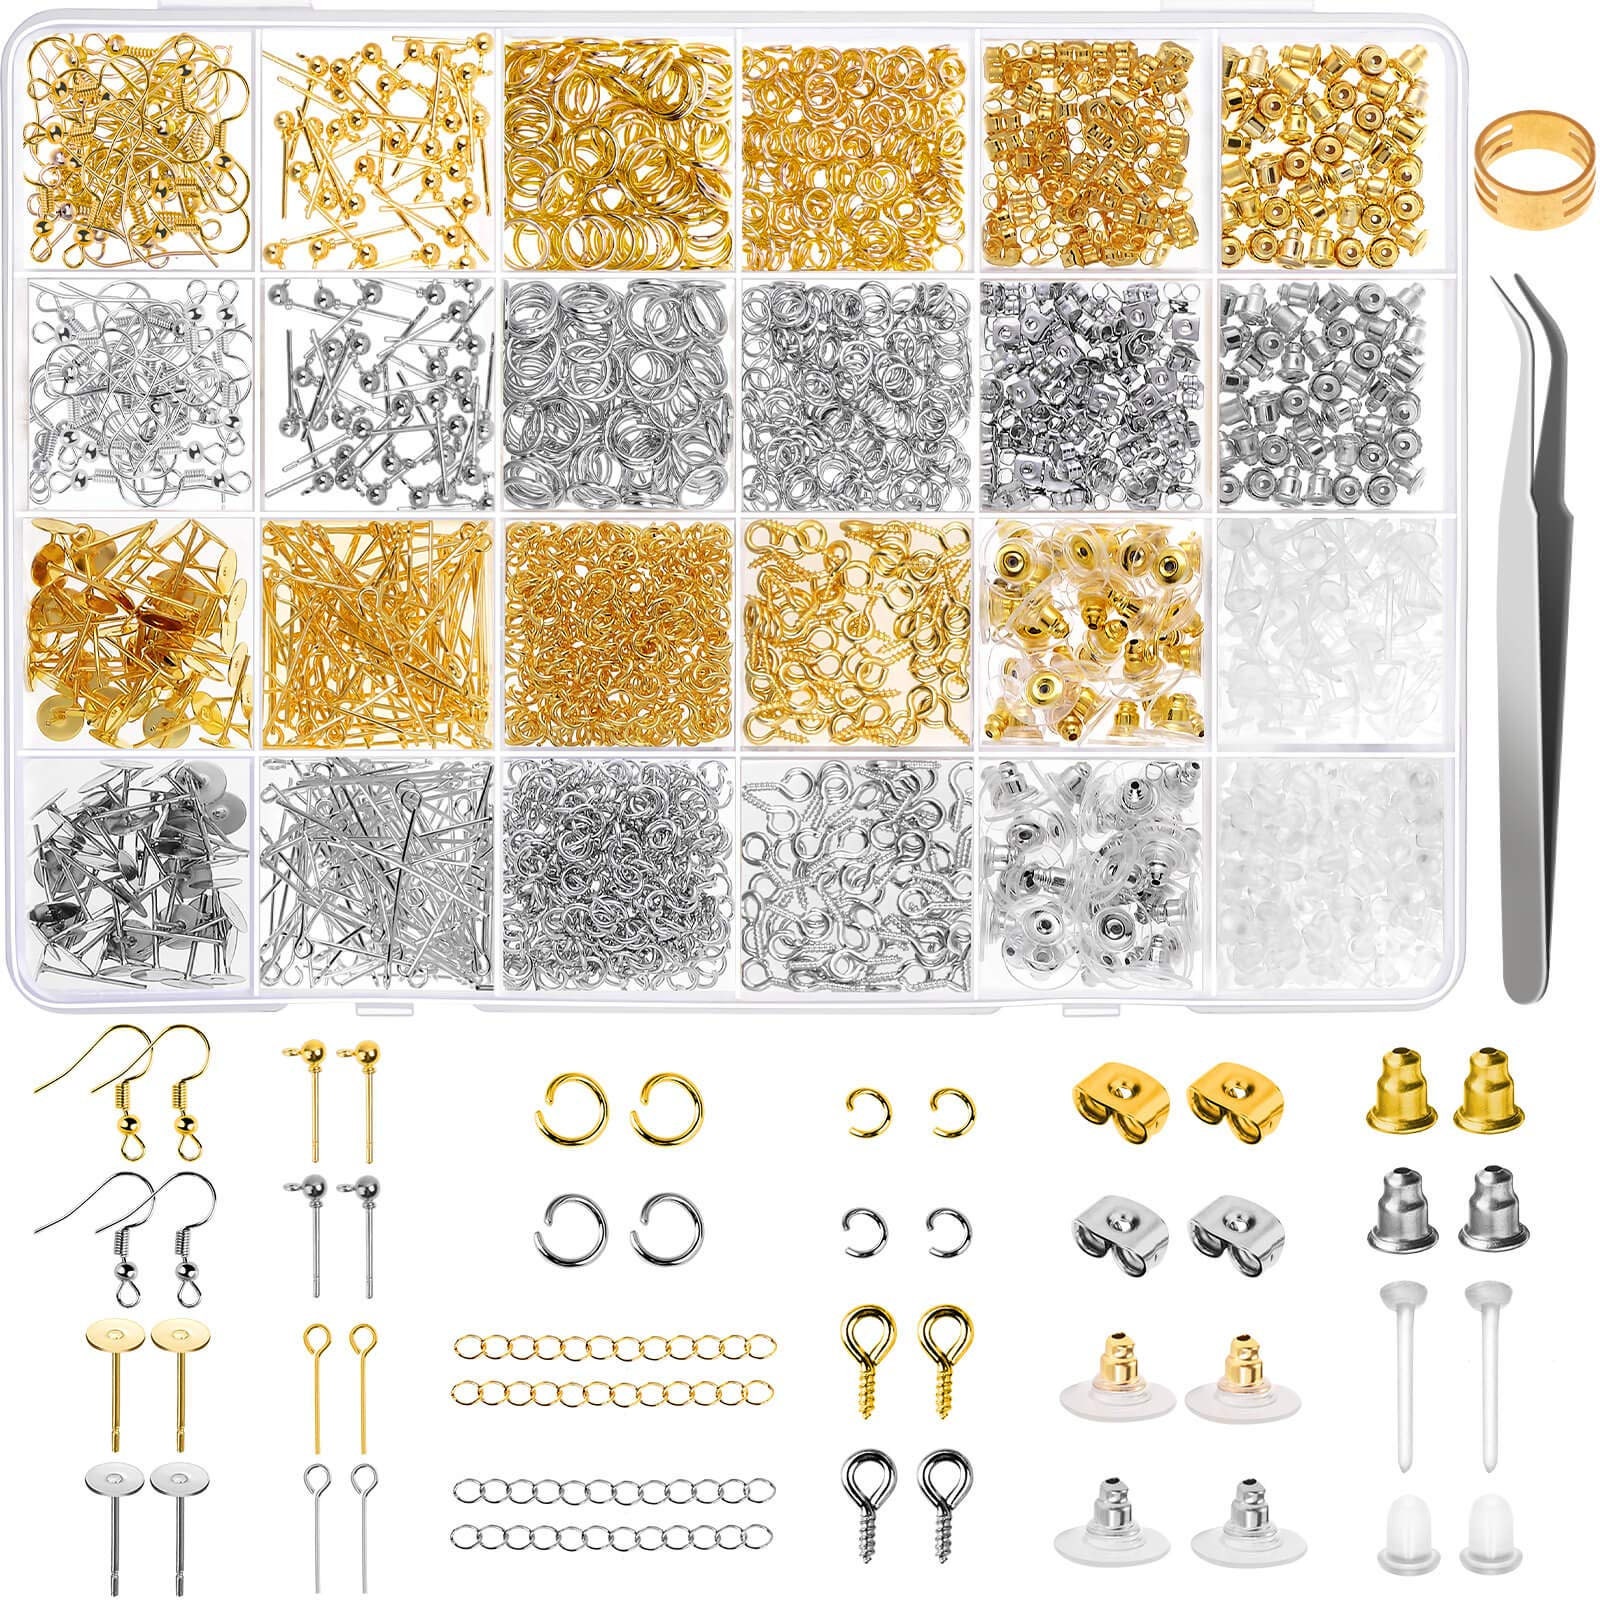 Earring Making Kit, 2900pcs Earring Hardware Pieces Repair Parts Earring  Hooks Posts Backs Jewelry Making silver & Gold by Fablise Craft 